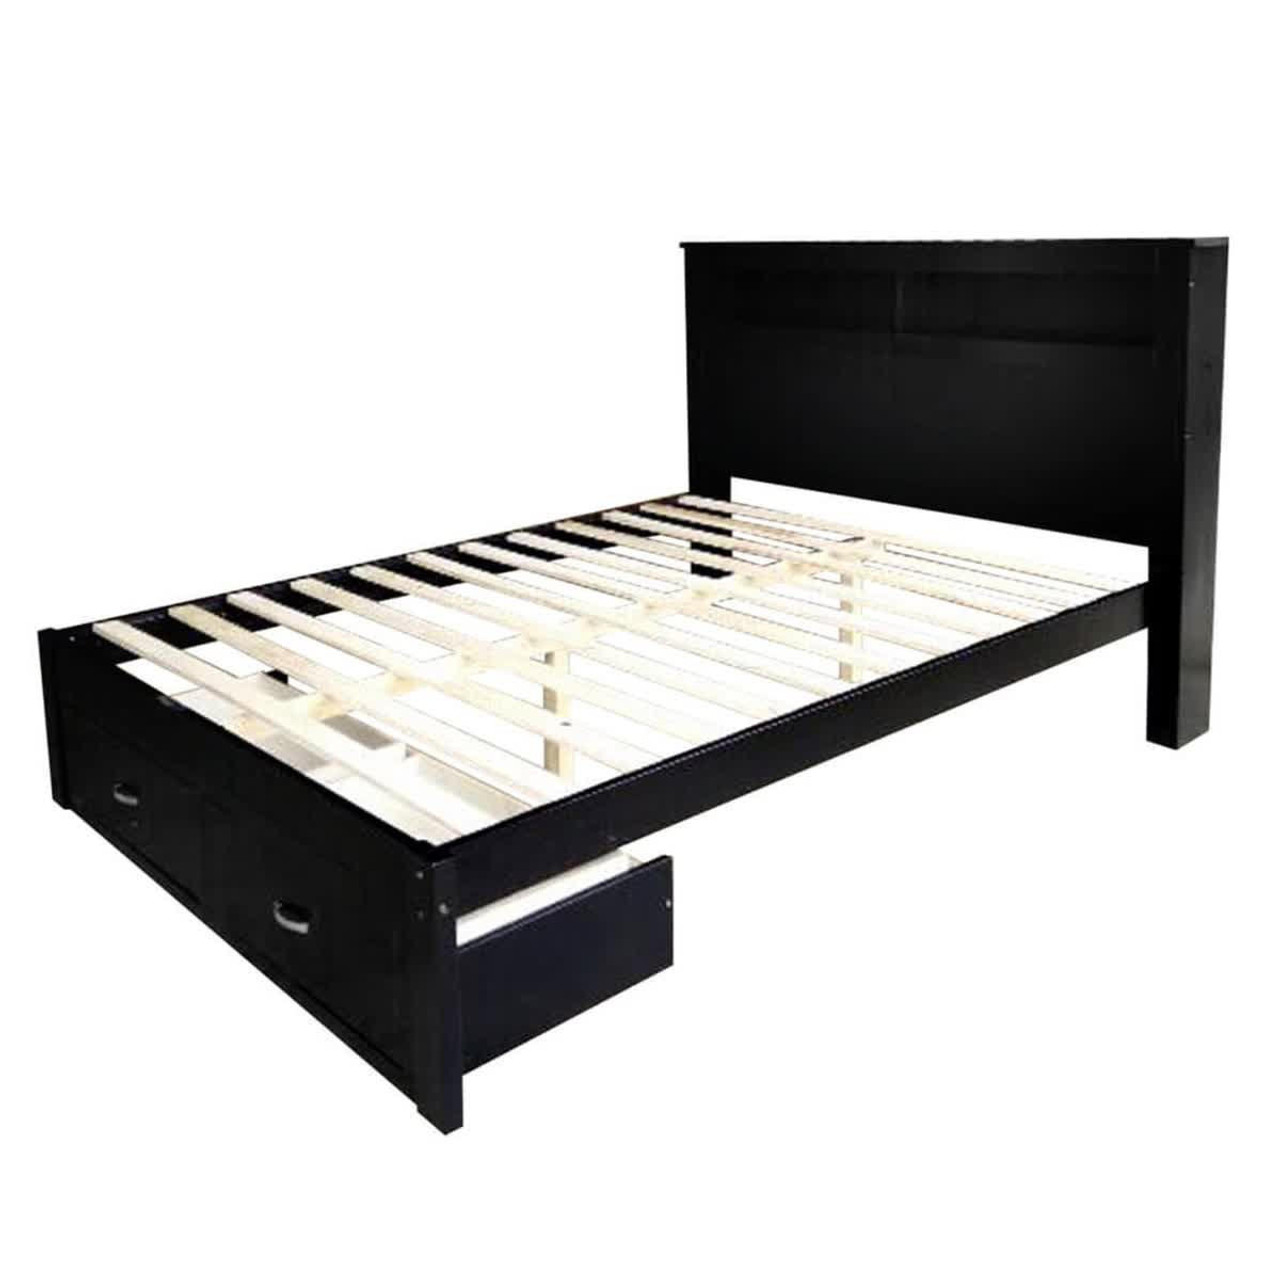 Porcia Timber Bed with Storage Shelves & Drawers - Black